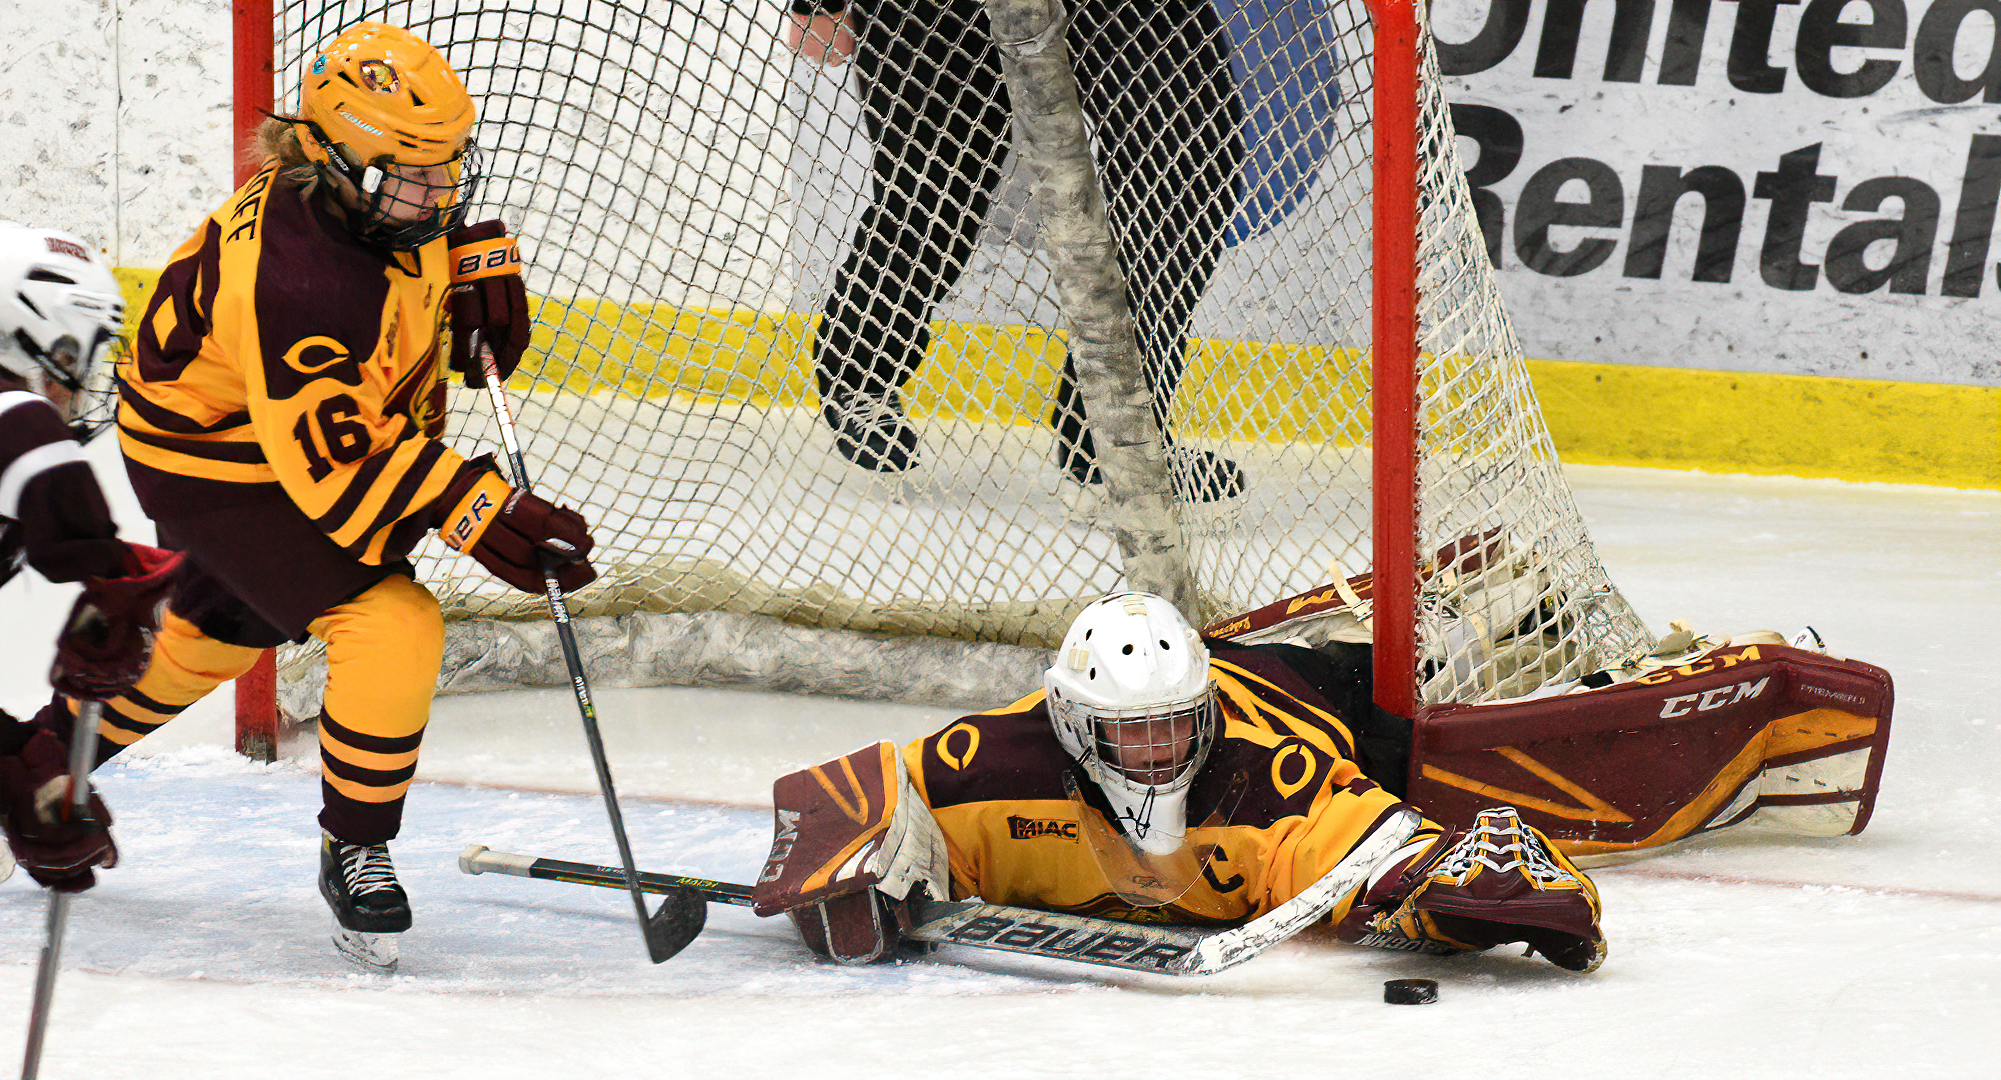 Kiana Flaig makes a save on a breakaway during the second period of the Cobbers' 2-0 win. Flaig stopped all 41 shots to record the shutout.